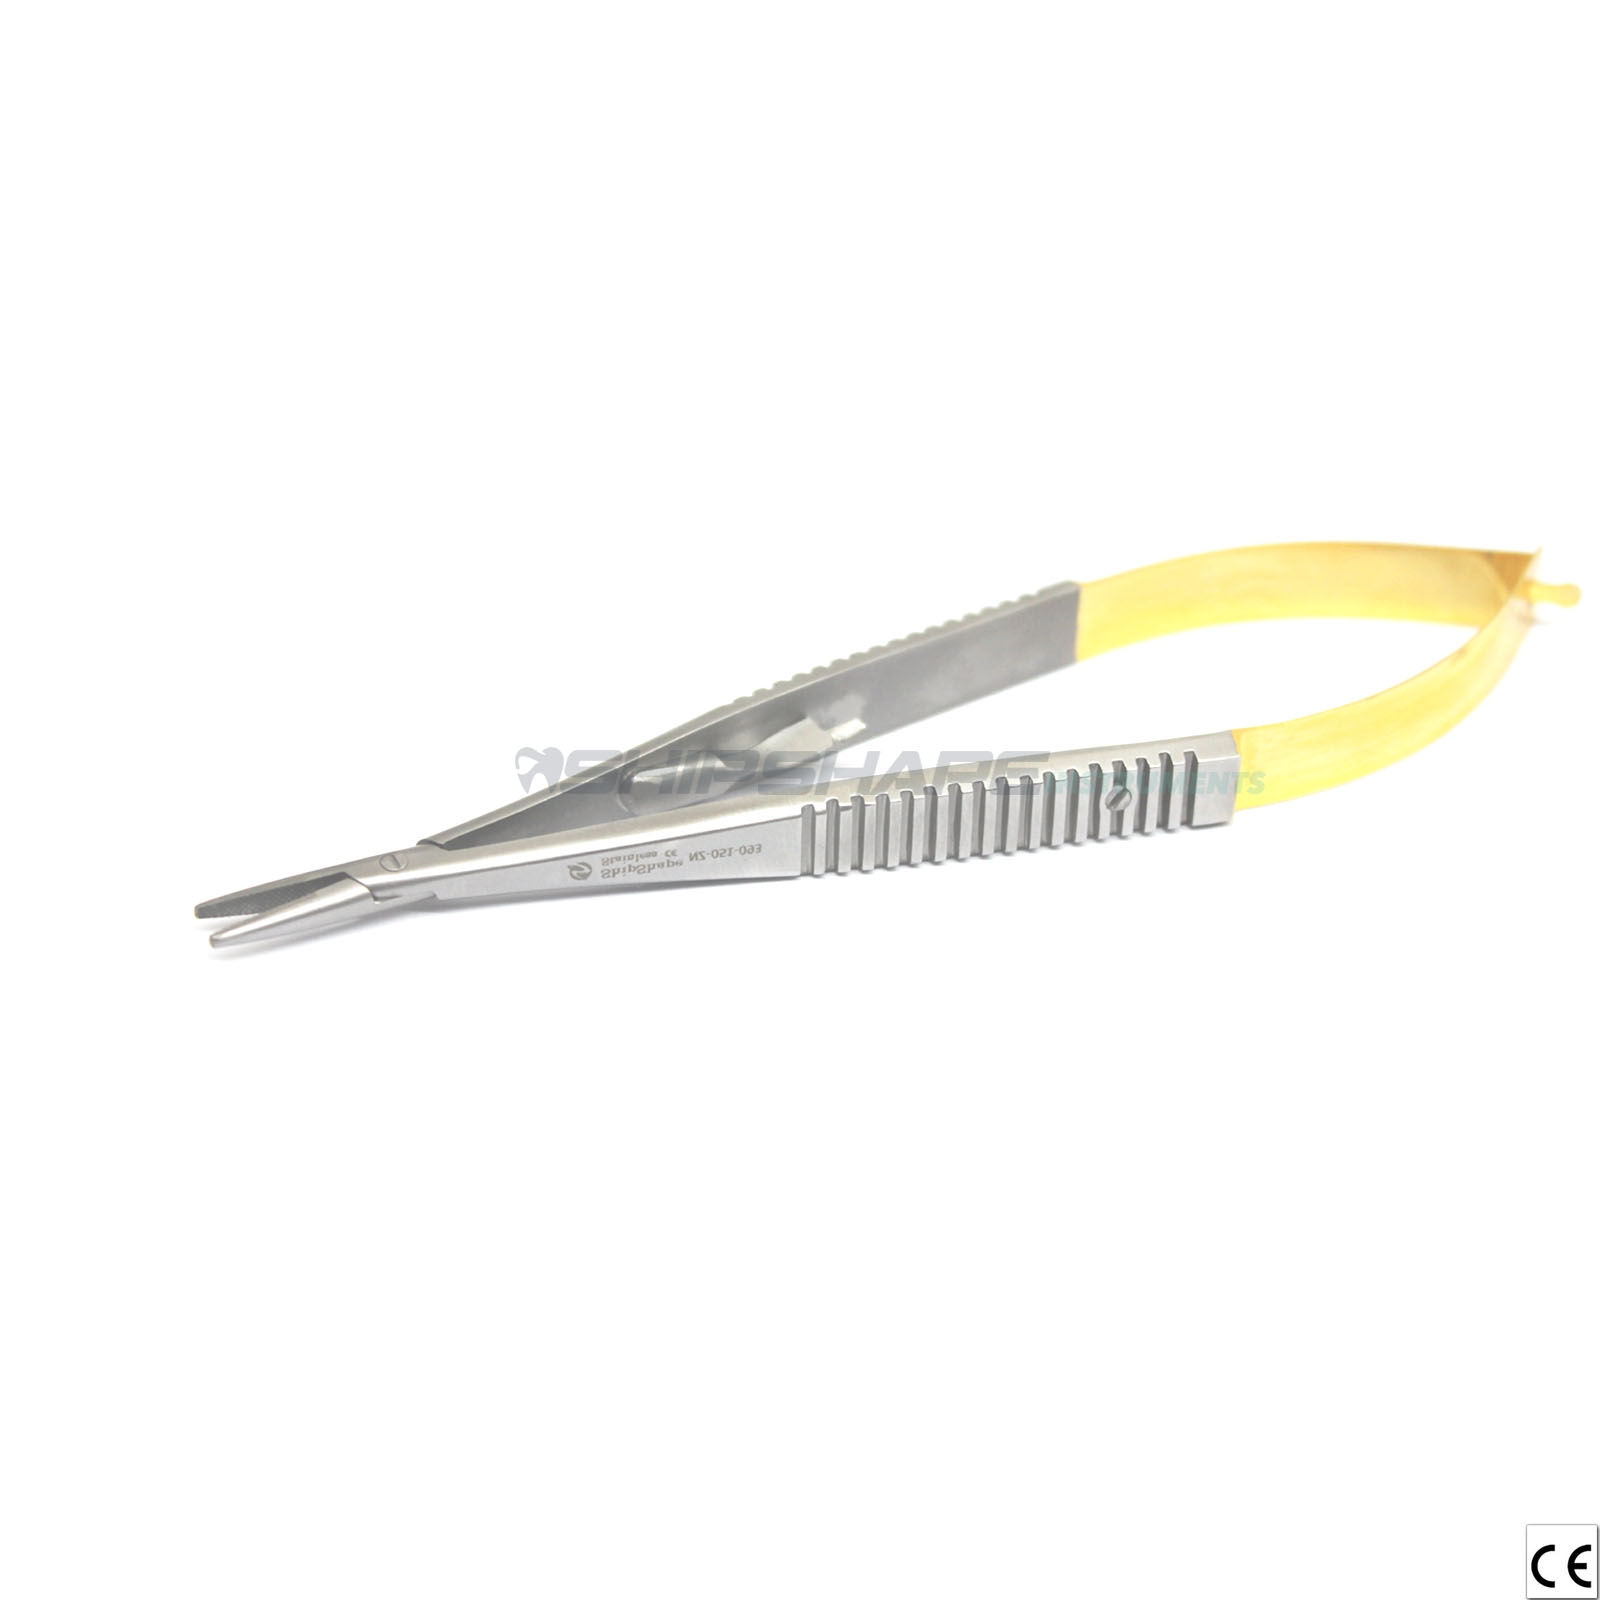 Castroviejo Needle Holder with Lock, 14 cm, Straight, Smooth T/C Tips Shipshape Instruments NZ-051-093ea-1429